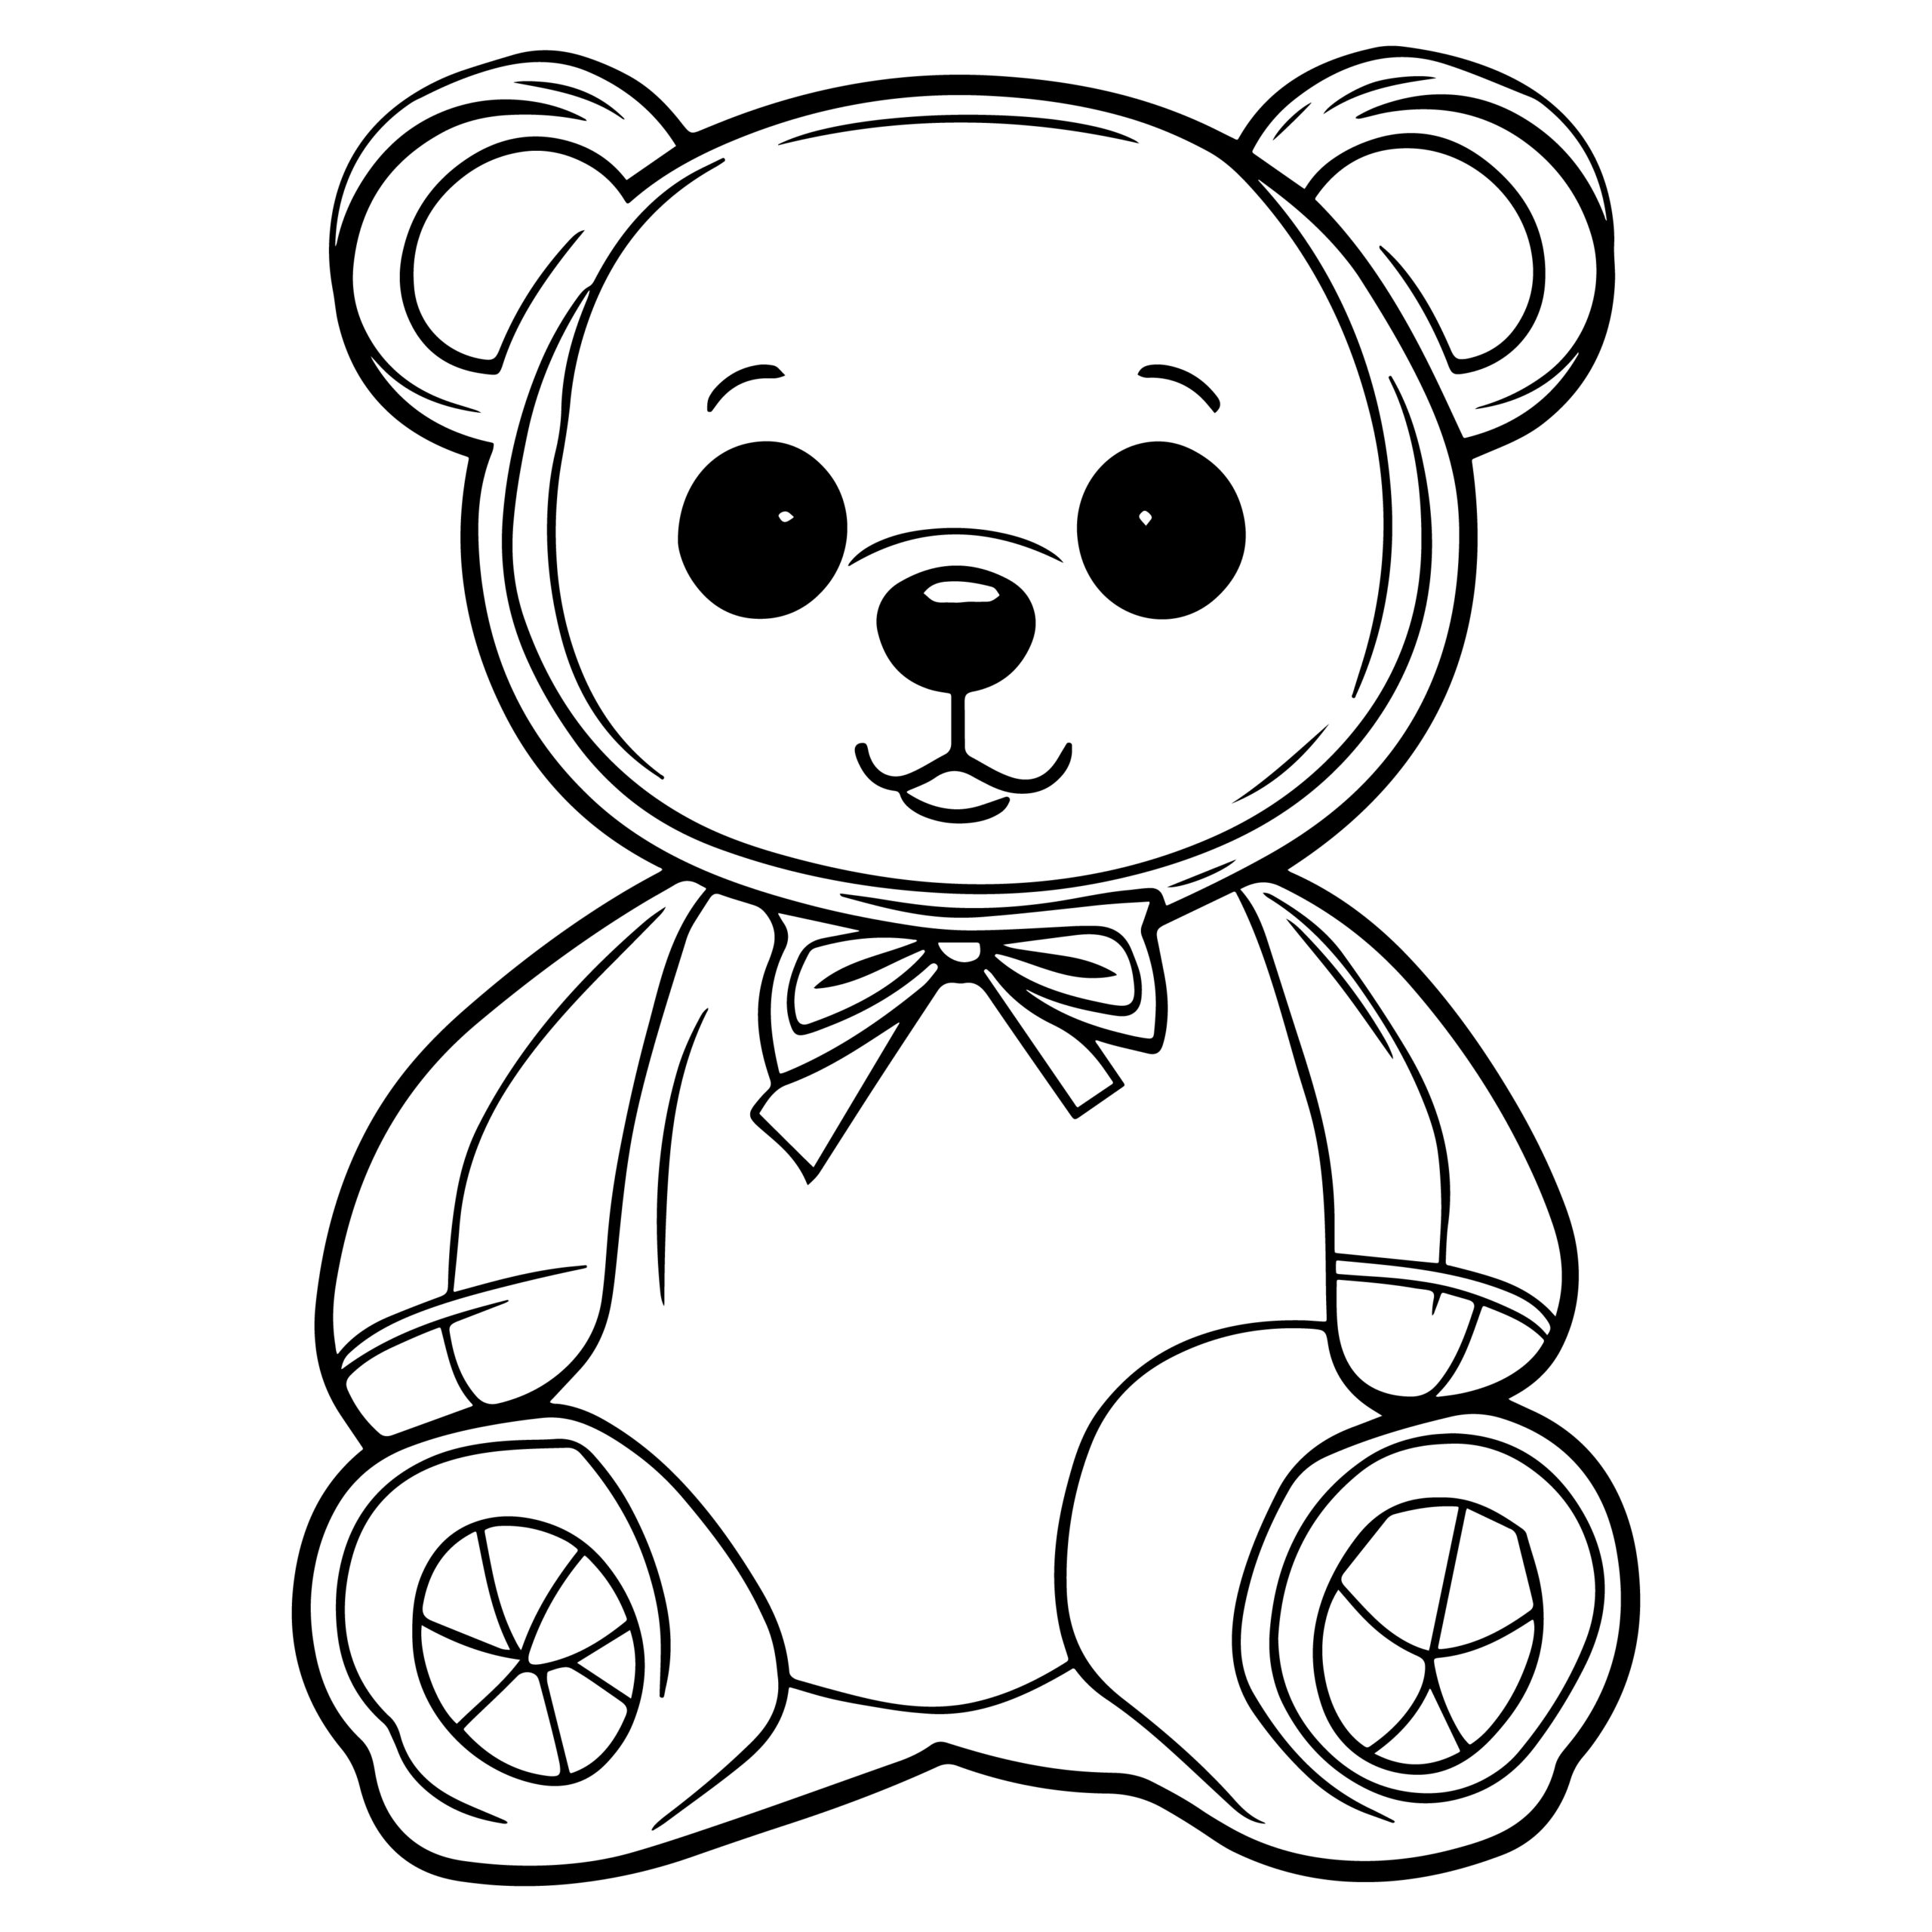 Teddy bear coloring book teddy bear coloring pages made by teachers